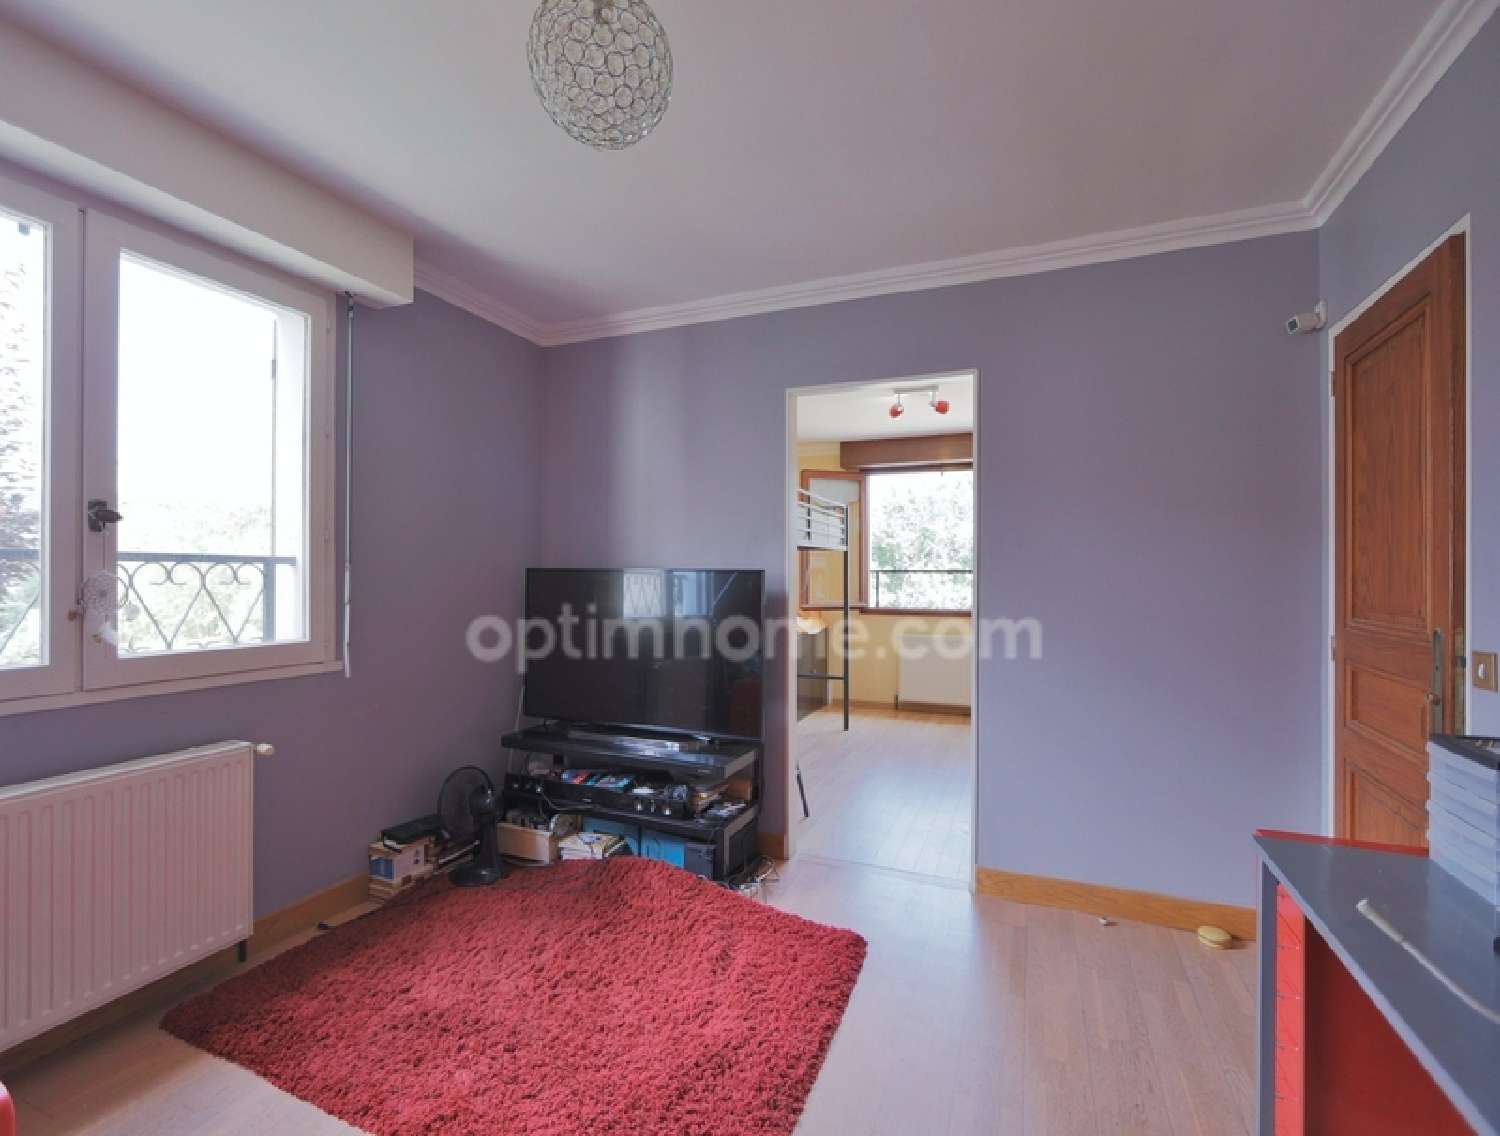  kaufen Wohnung/ Apartment Chambly Oise 6